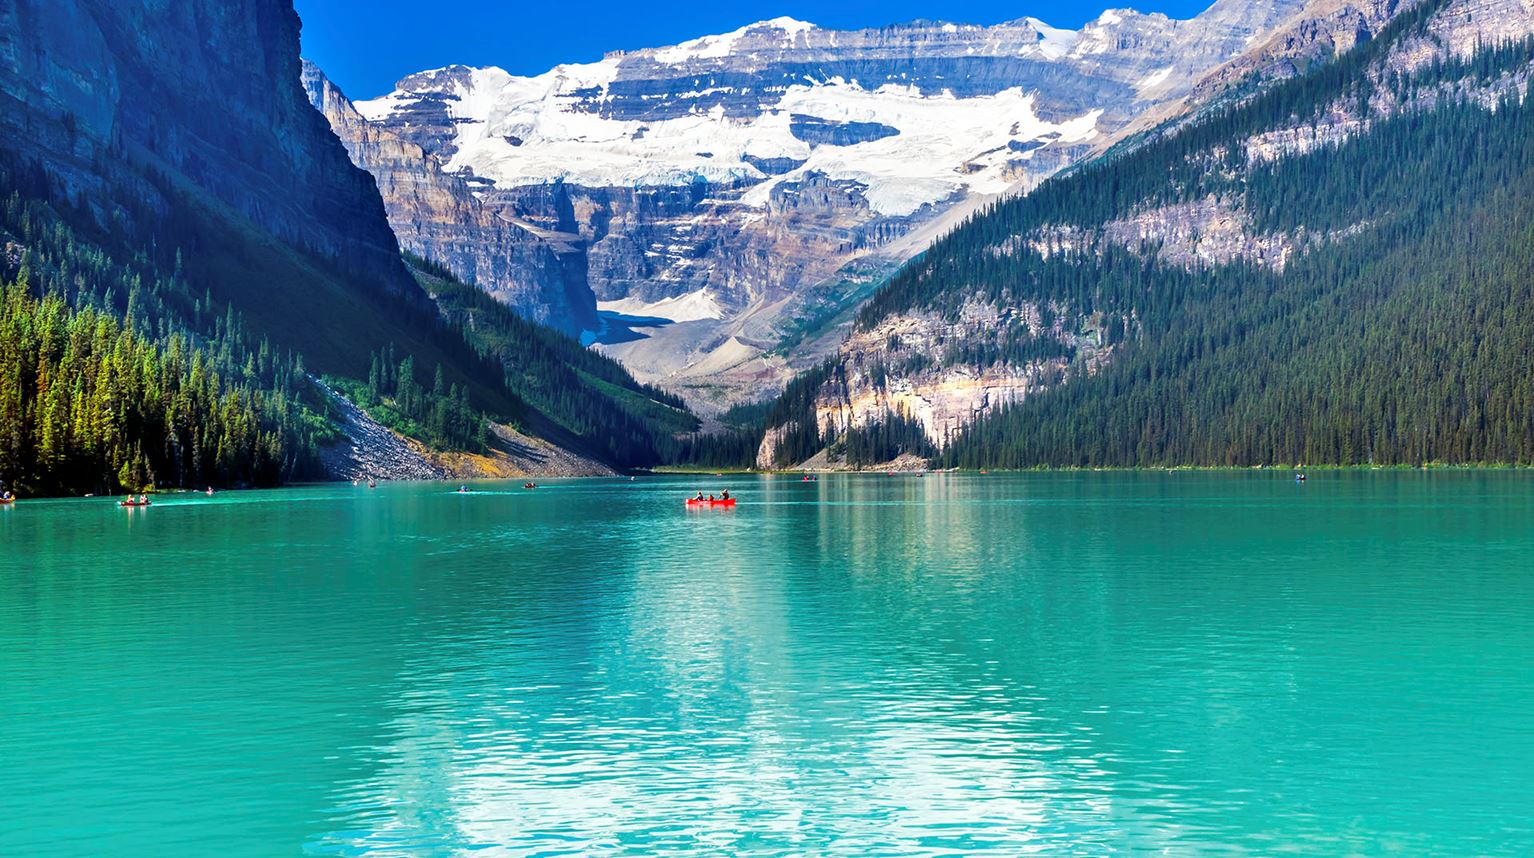 View of Lake Louise with turquoise water and mountain at Banff National Park, Alberta, Canada